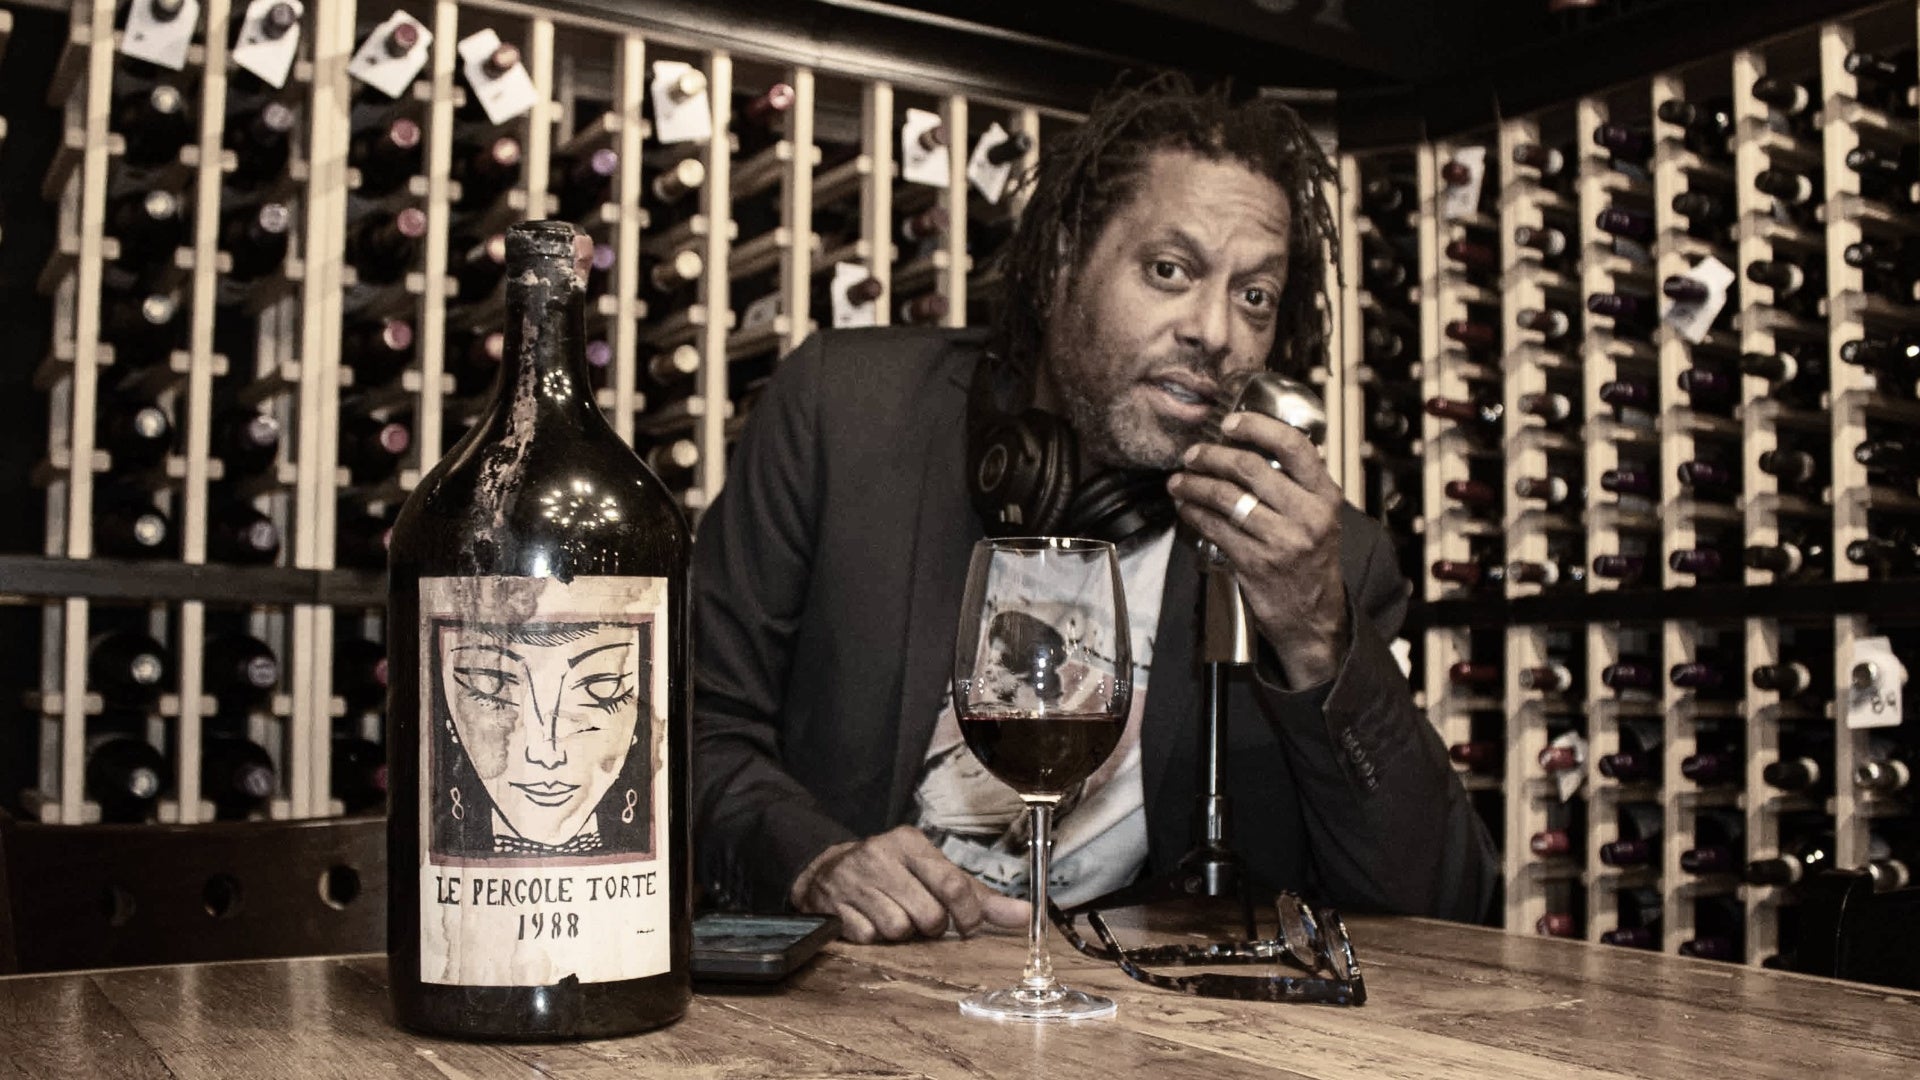 PODCAST: The Black Wine Guy Experience hosts Tooth & Nail